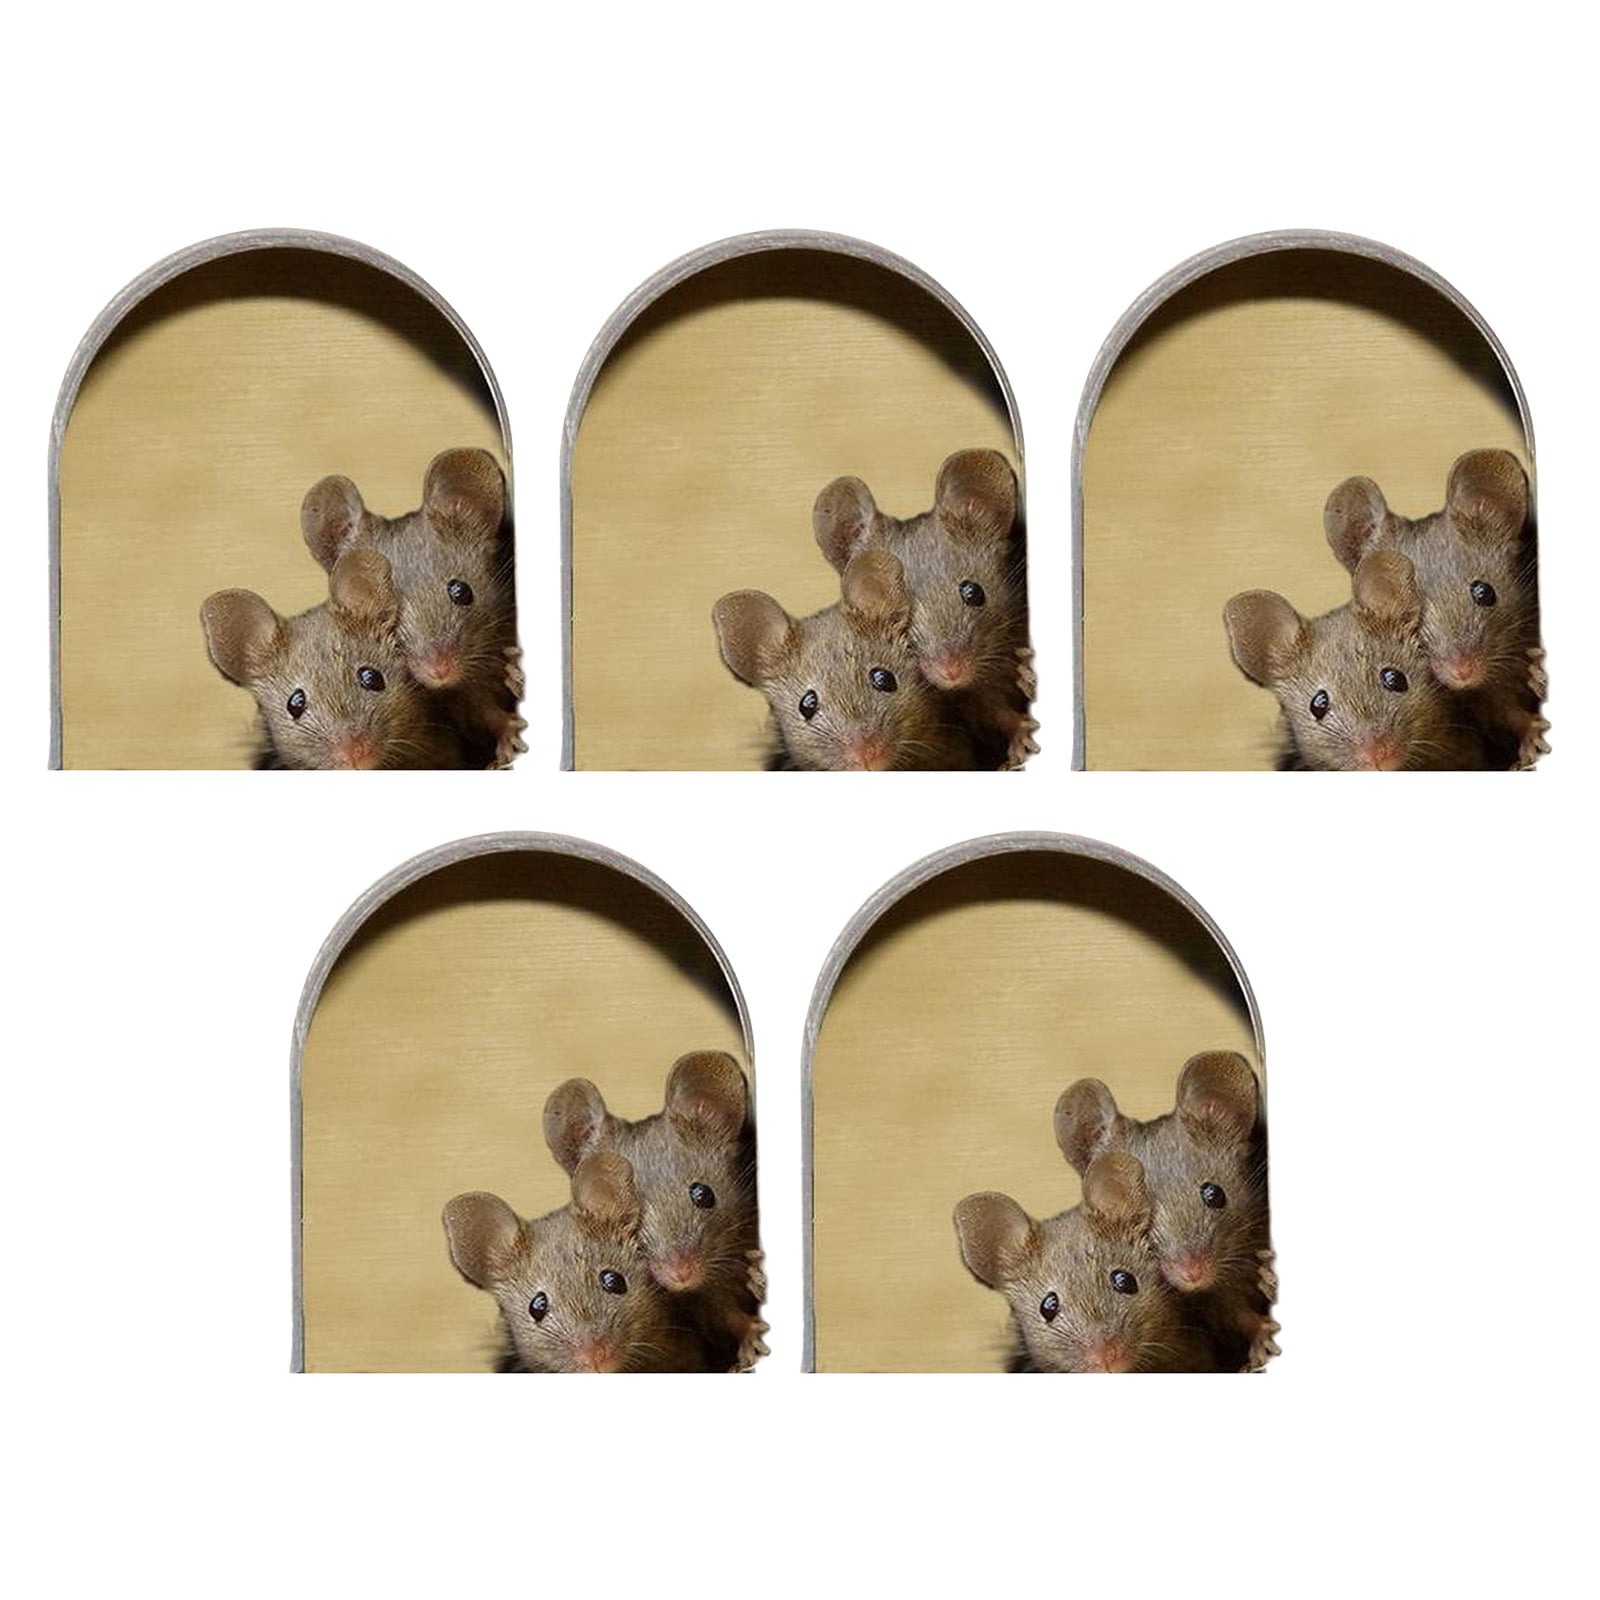 3D Cute Mouse Hole Decals Stickers For Home Door Stair Windows DIY Ornament 